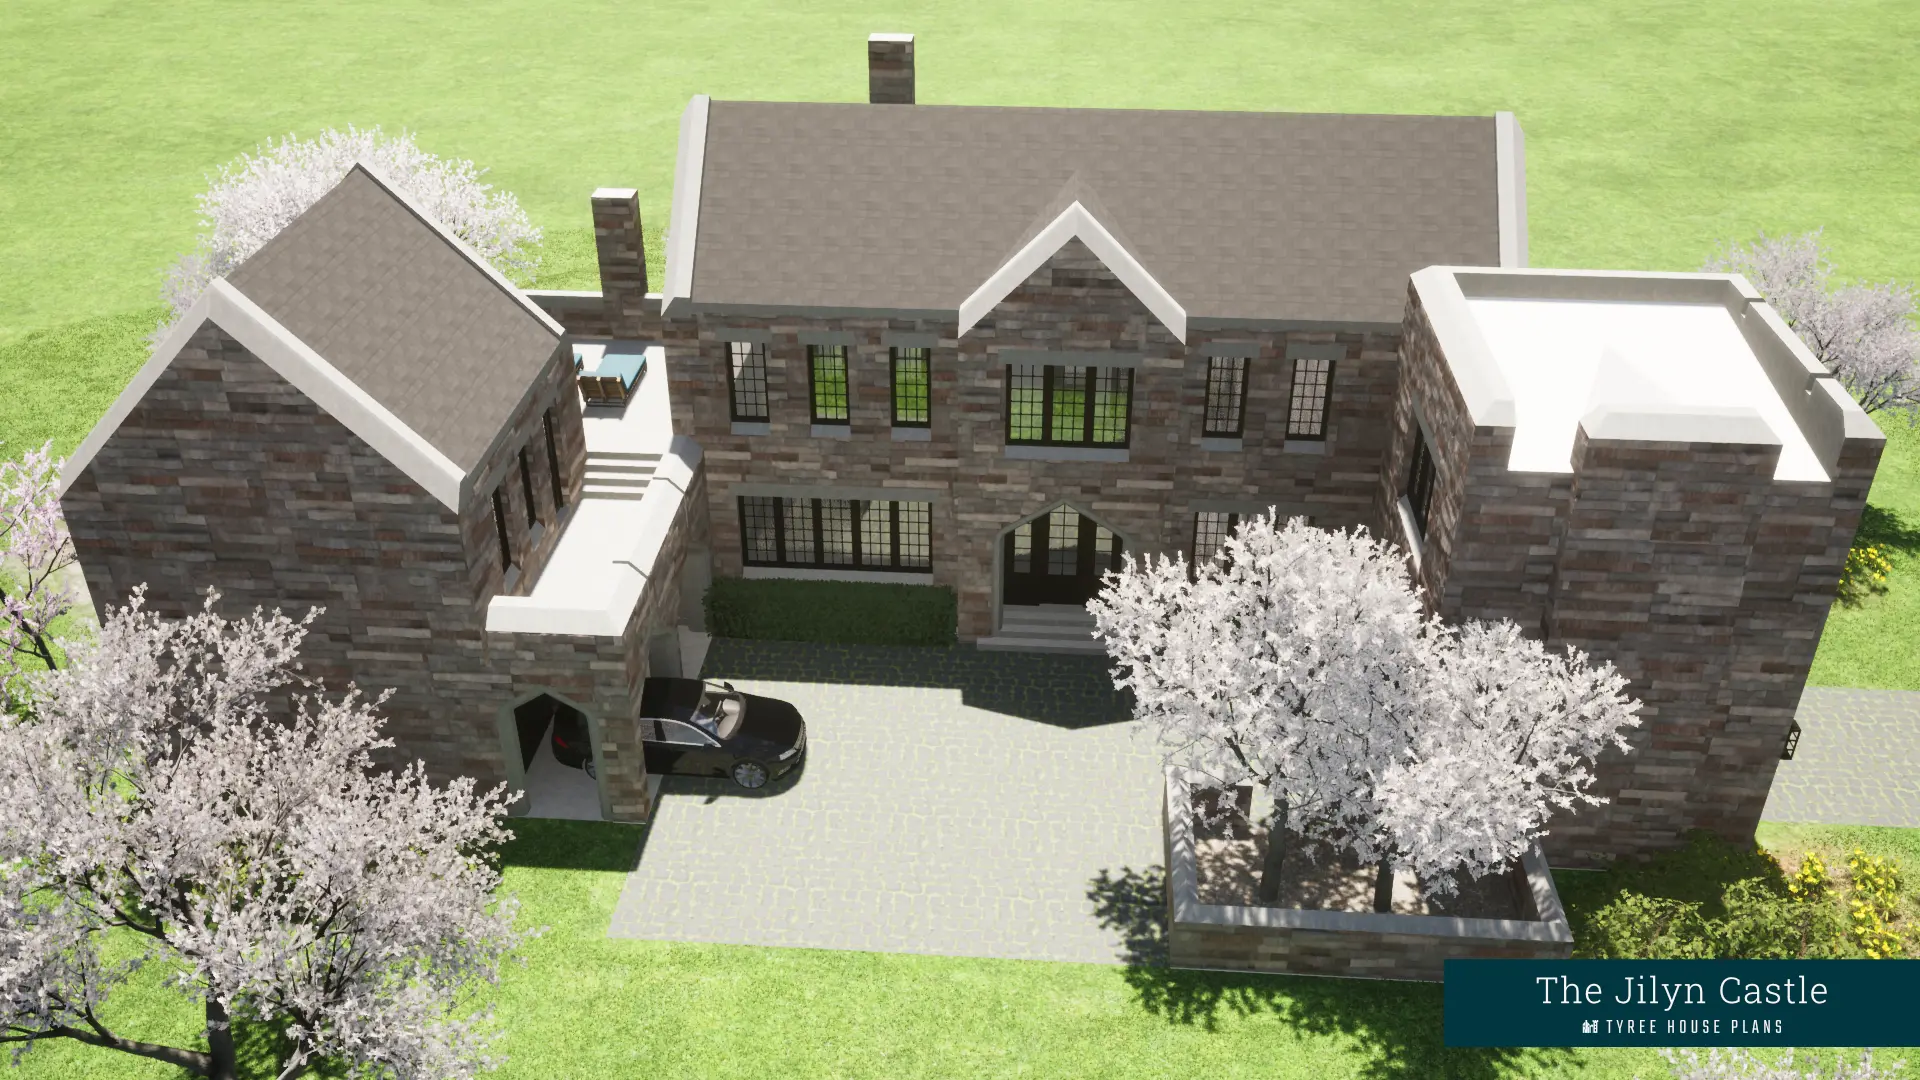 View from above. Jilyn Castle by Tyree House Plans.